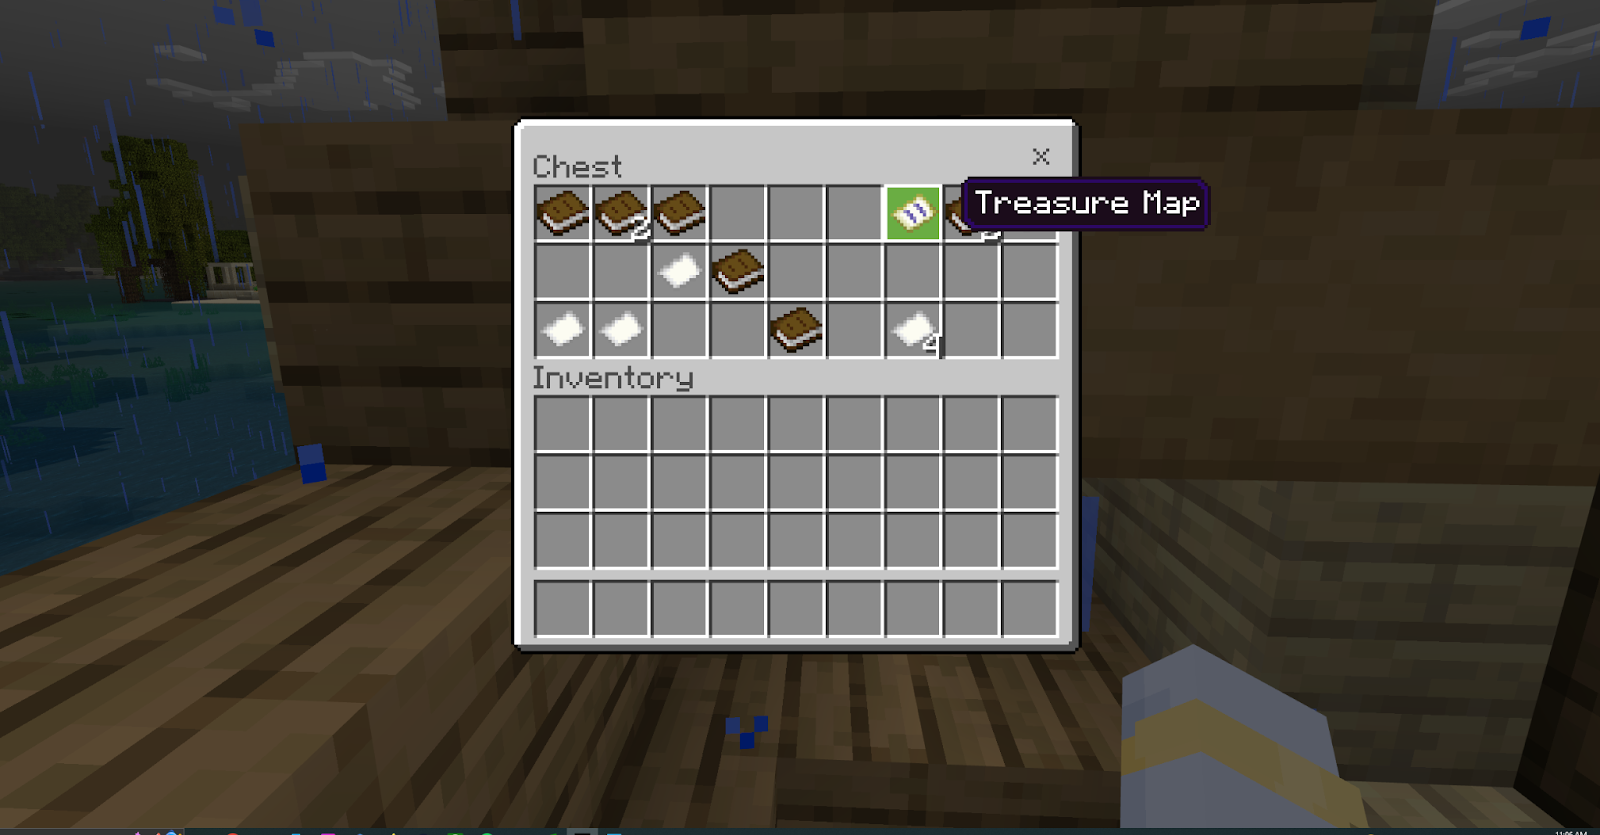 This image shows how the treasure map can be found in a sunken ship chest.